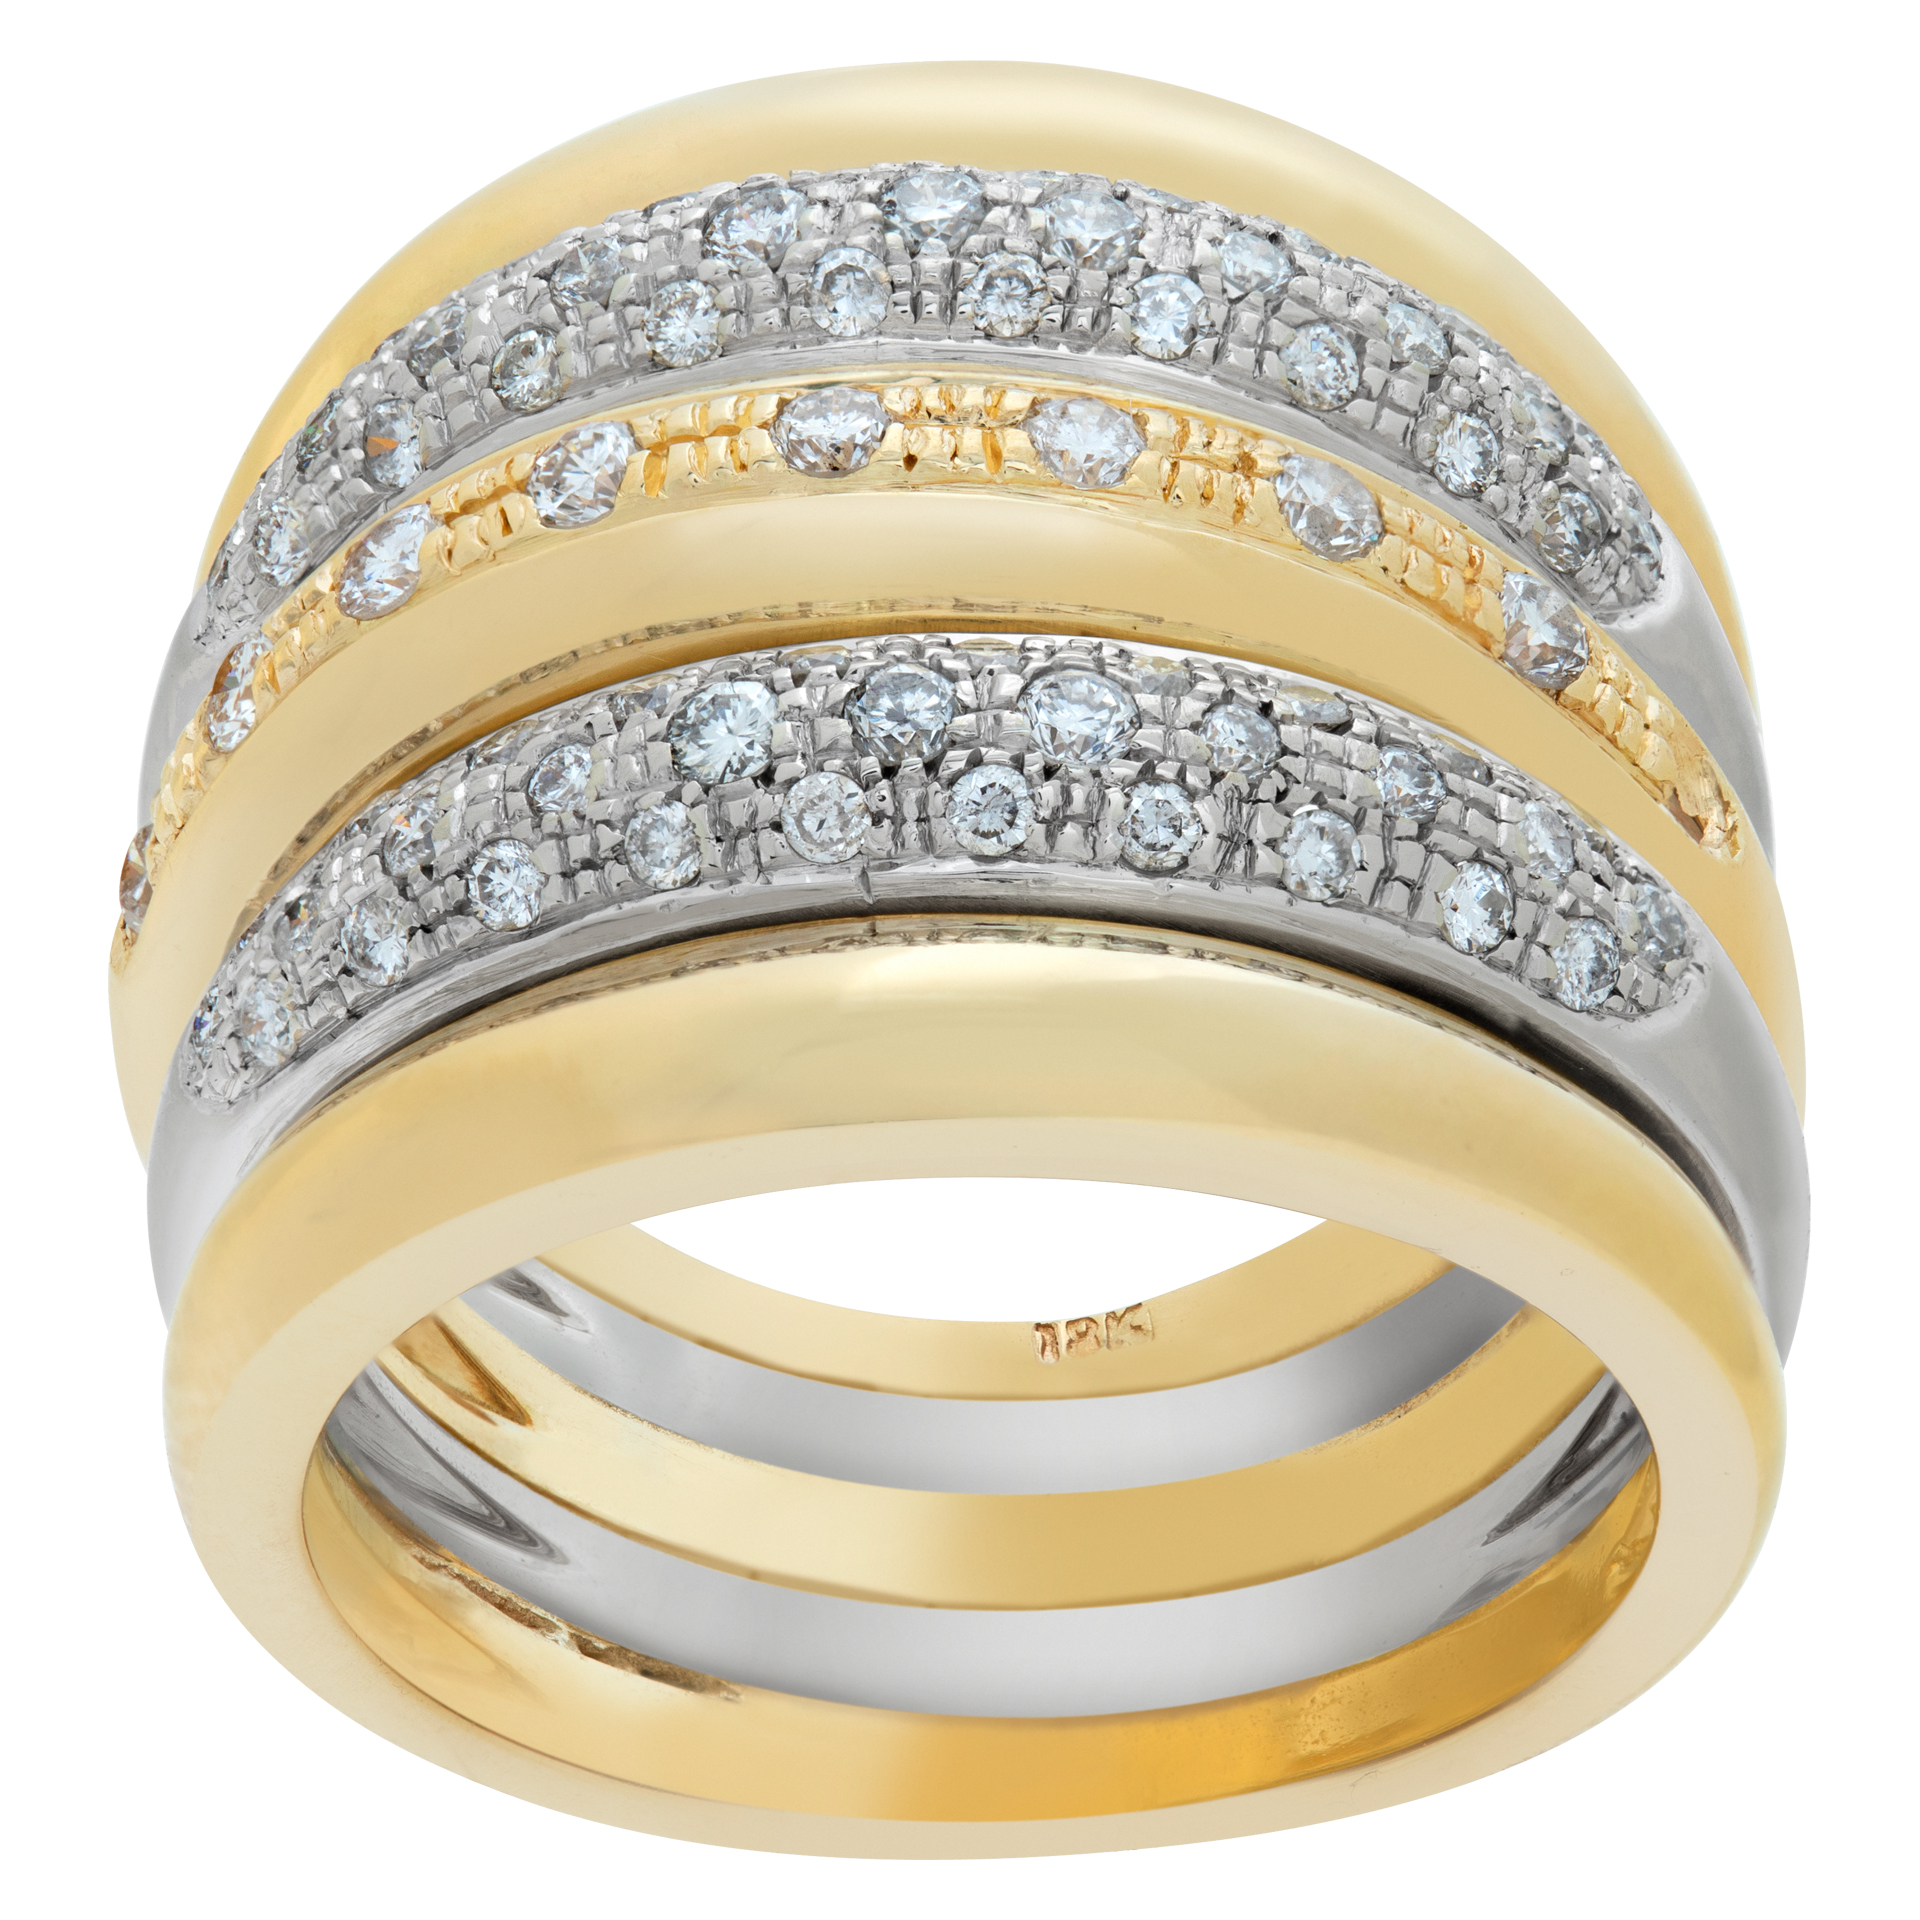 Wide diamond ring in 18k white and yellow gold image 1